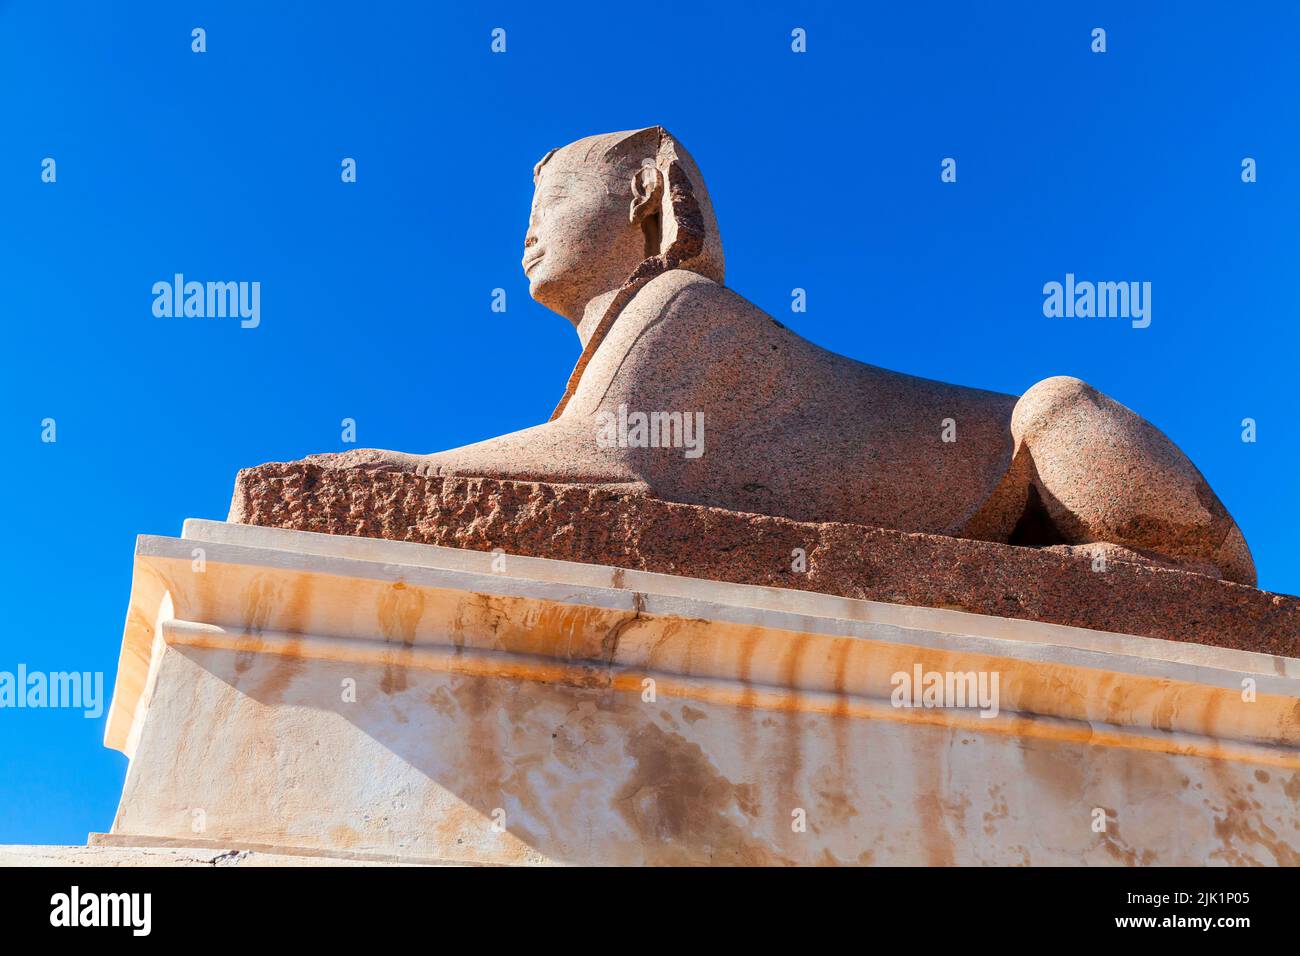 Statue of a Sphinx located at Pompeys Pillar park in Alexandria, Egypt Stock Photo